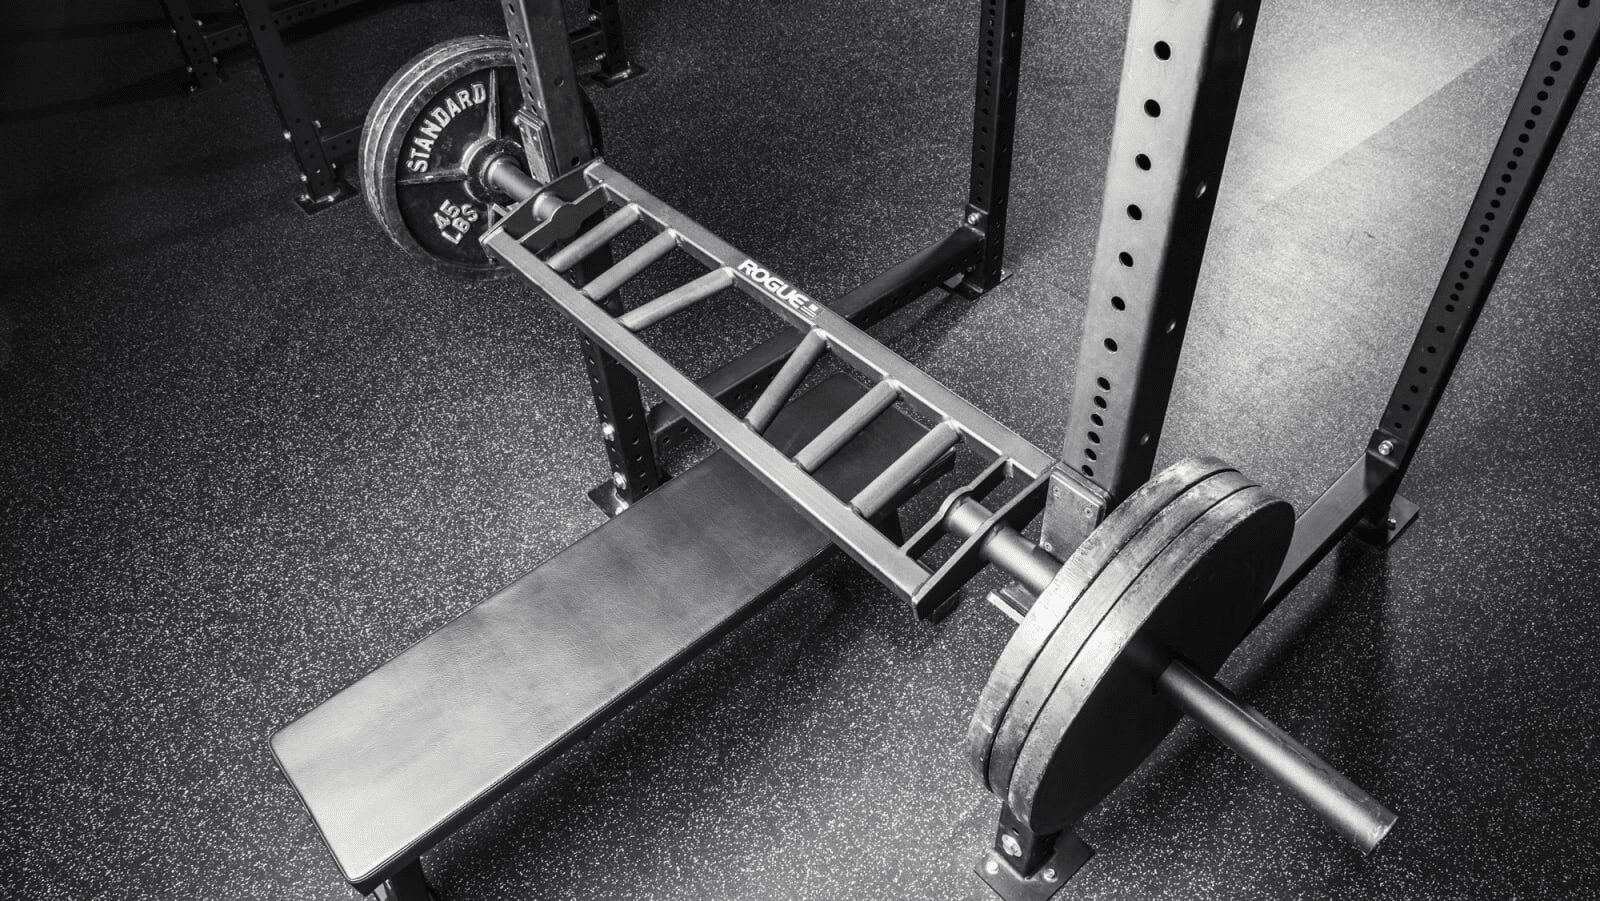 swiss bar setup in rack for the bench press